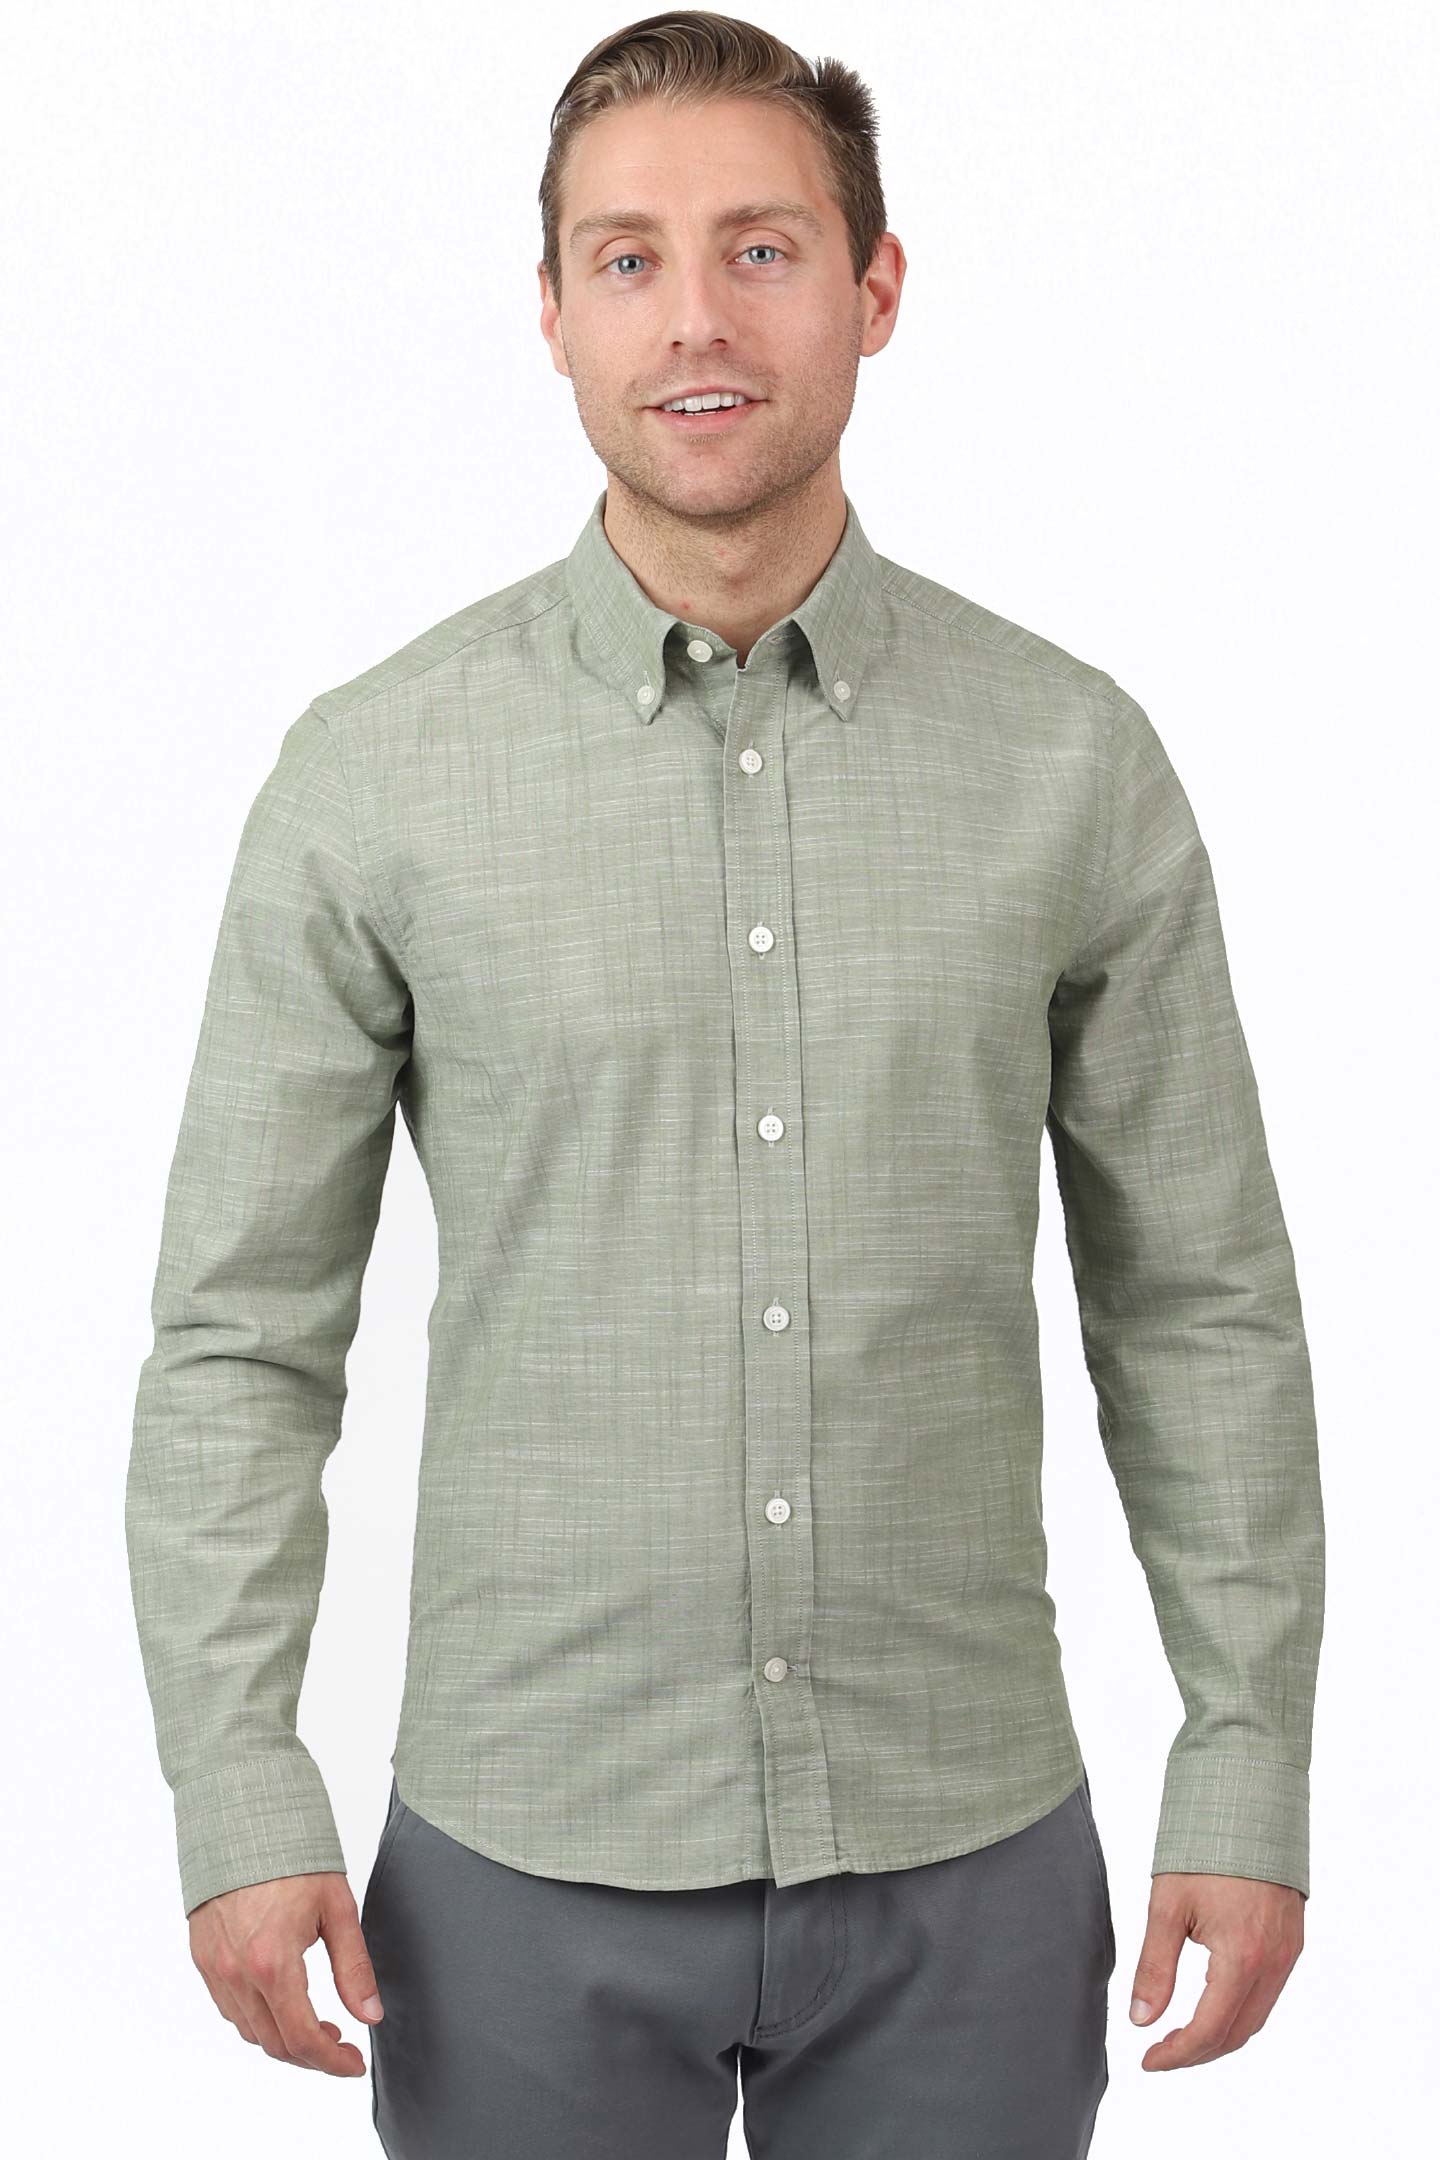 Buy Muted Green Button-Down Shirt for Short Men | Ash & Erie   Everyday Shirts